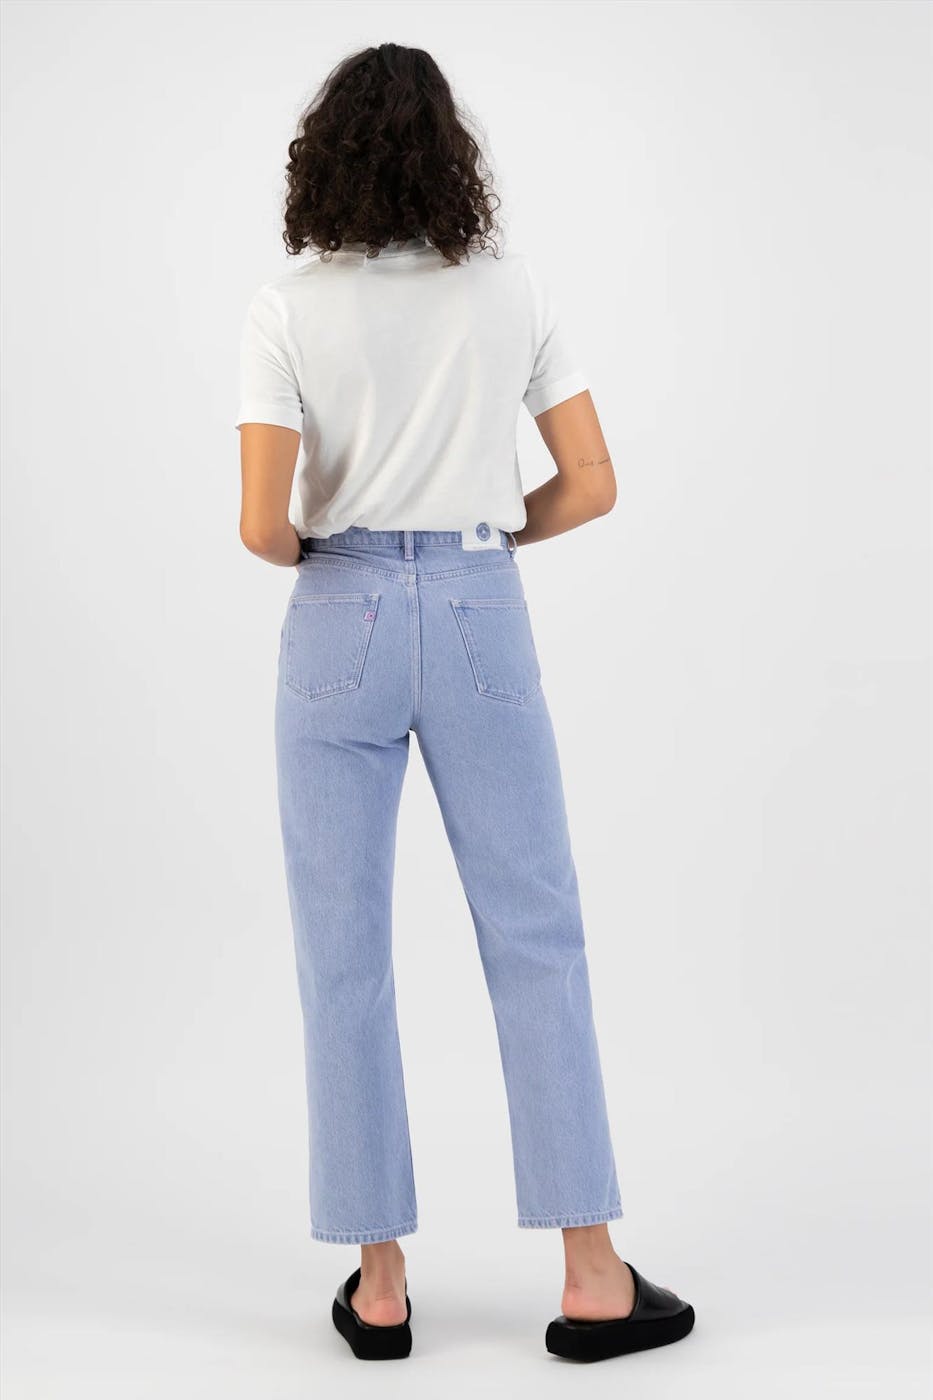 MUD jeans - Lichtpaarse Relax Rose Cropped jeans